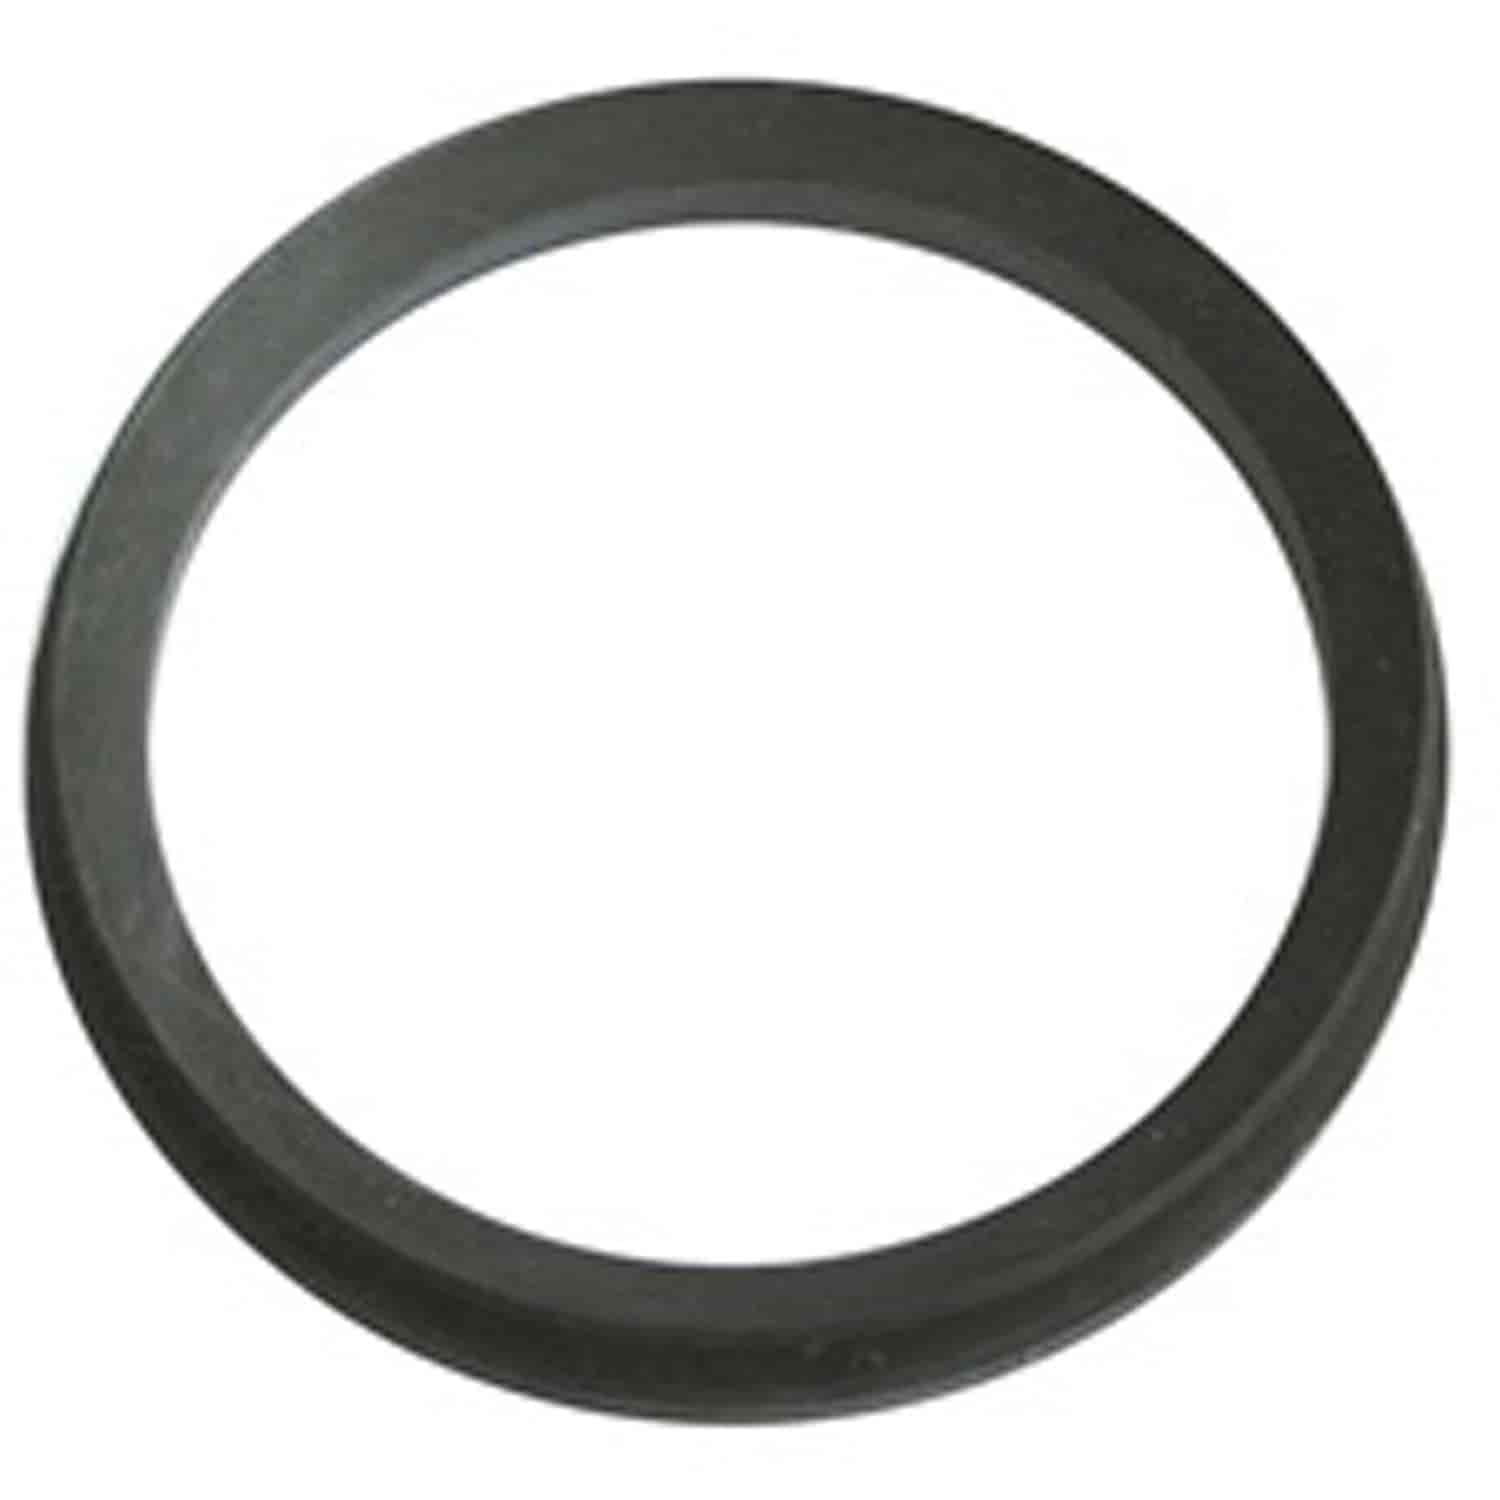 Outer Pinion Seal 1999-2003 Jeep Cherokee XJ with Dana 35 By Omix-ADA